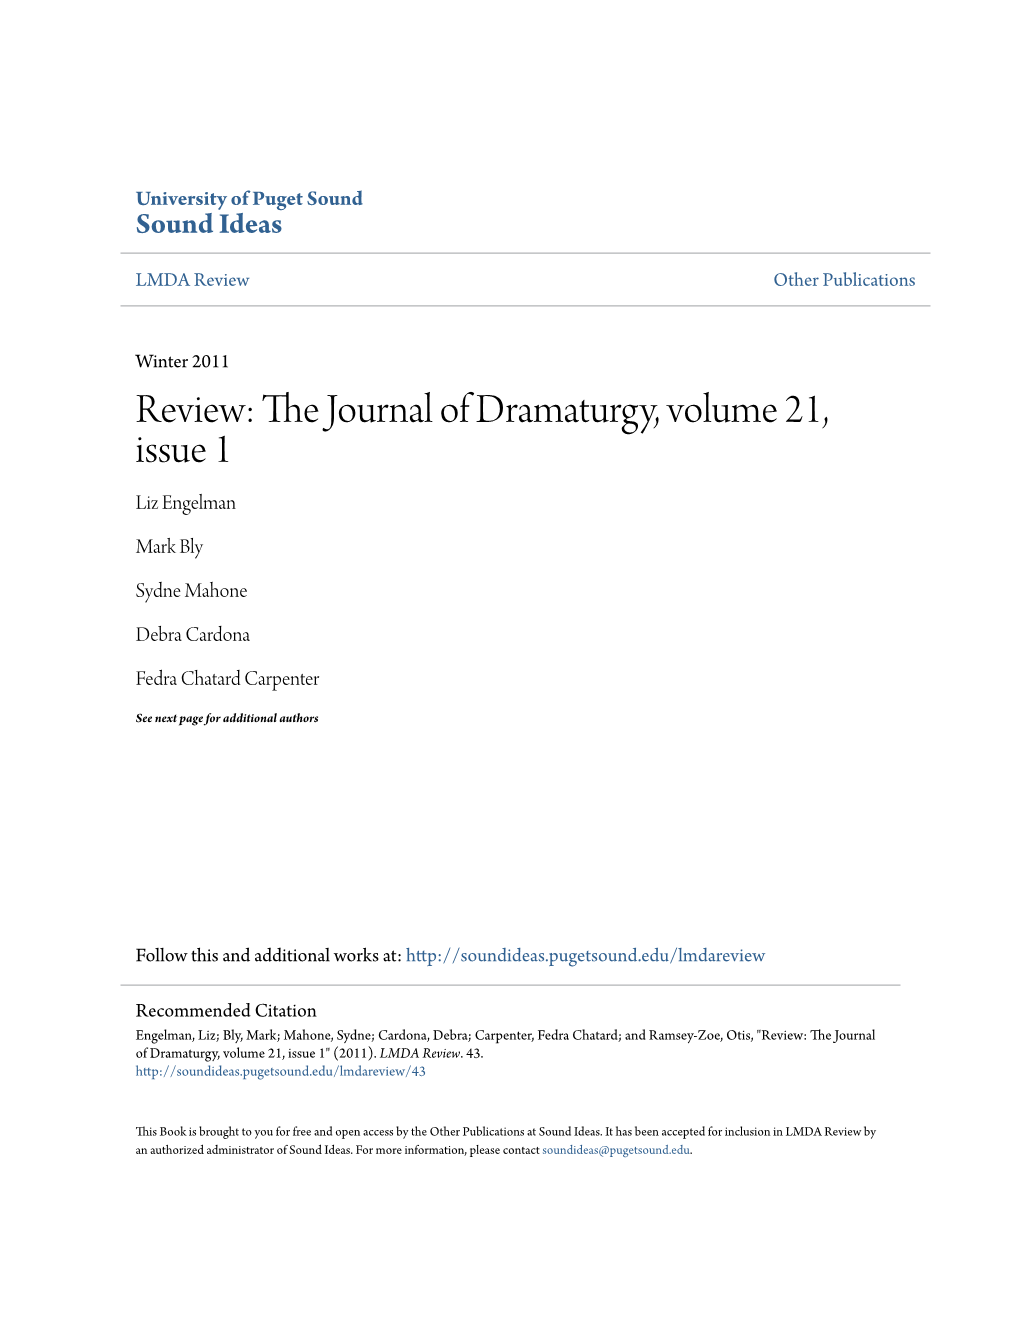 Review: the Journal of Dramaturgy, Volume 21, Issue 1